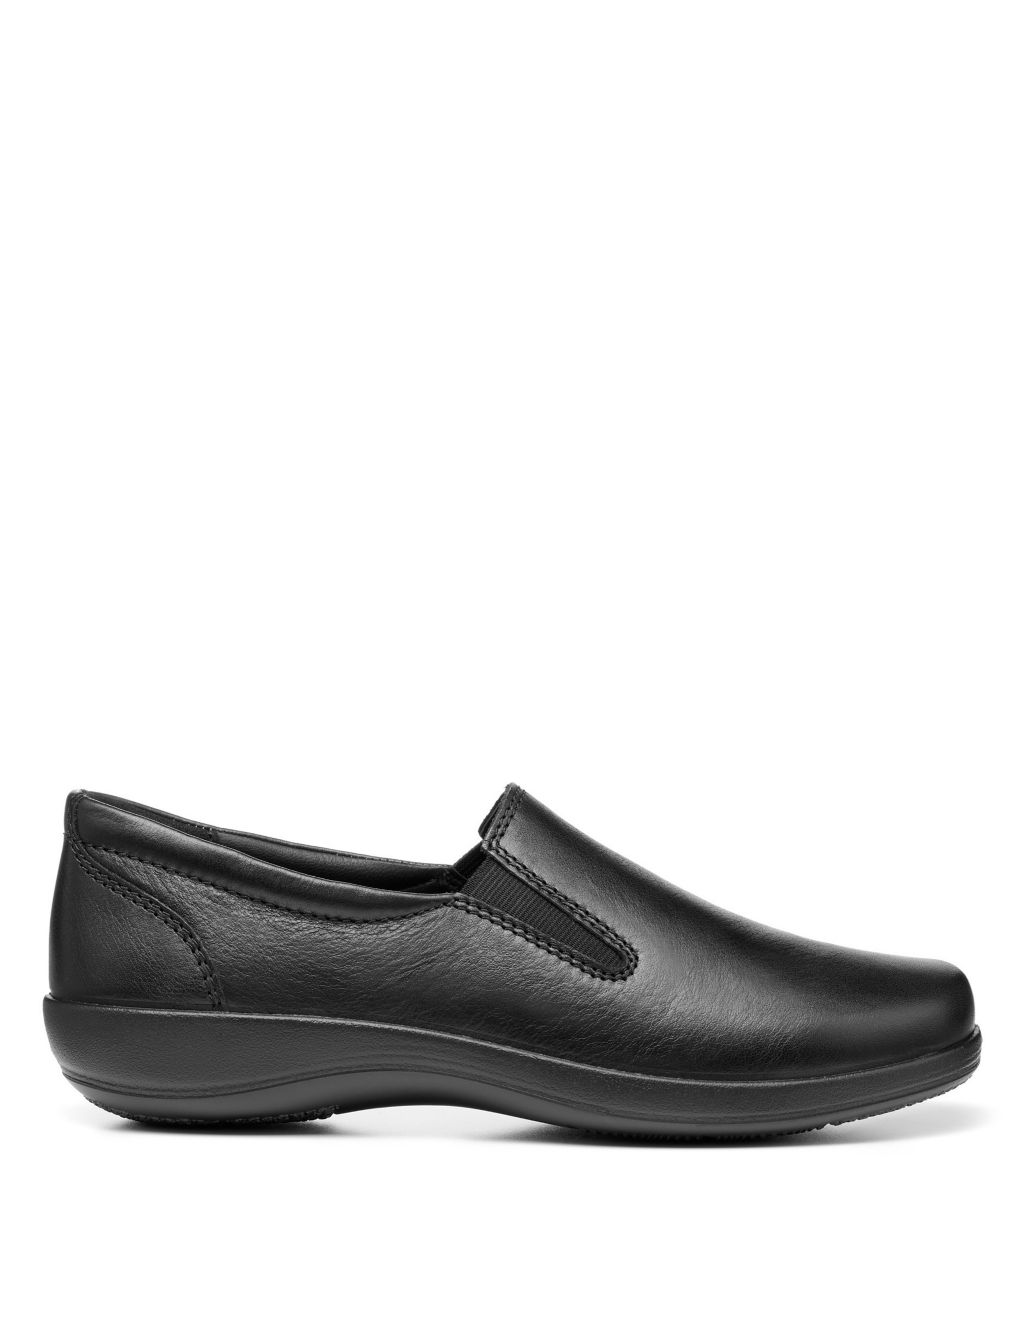 Glove II Leather Slip On Boat Shoes